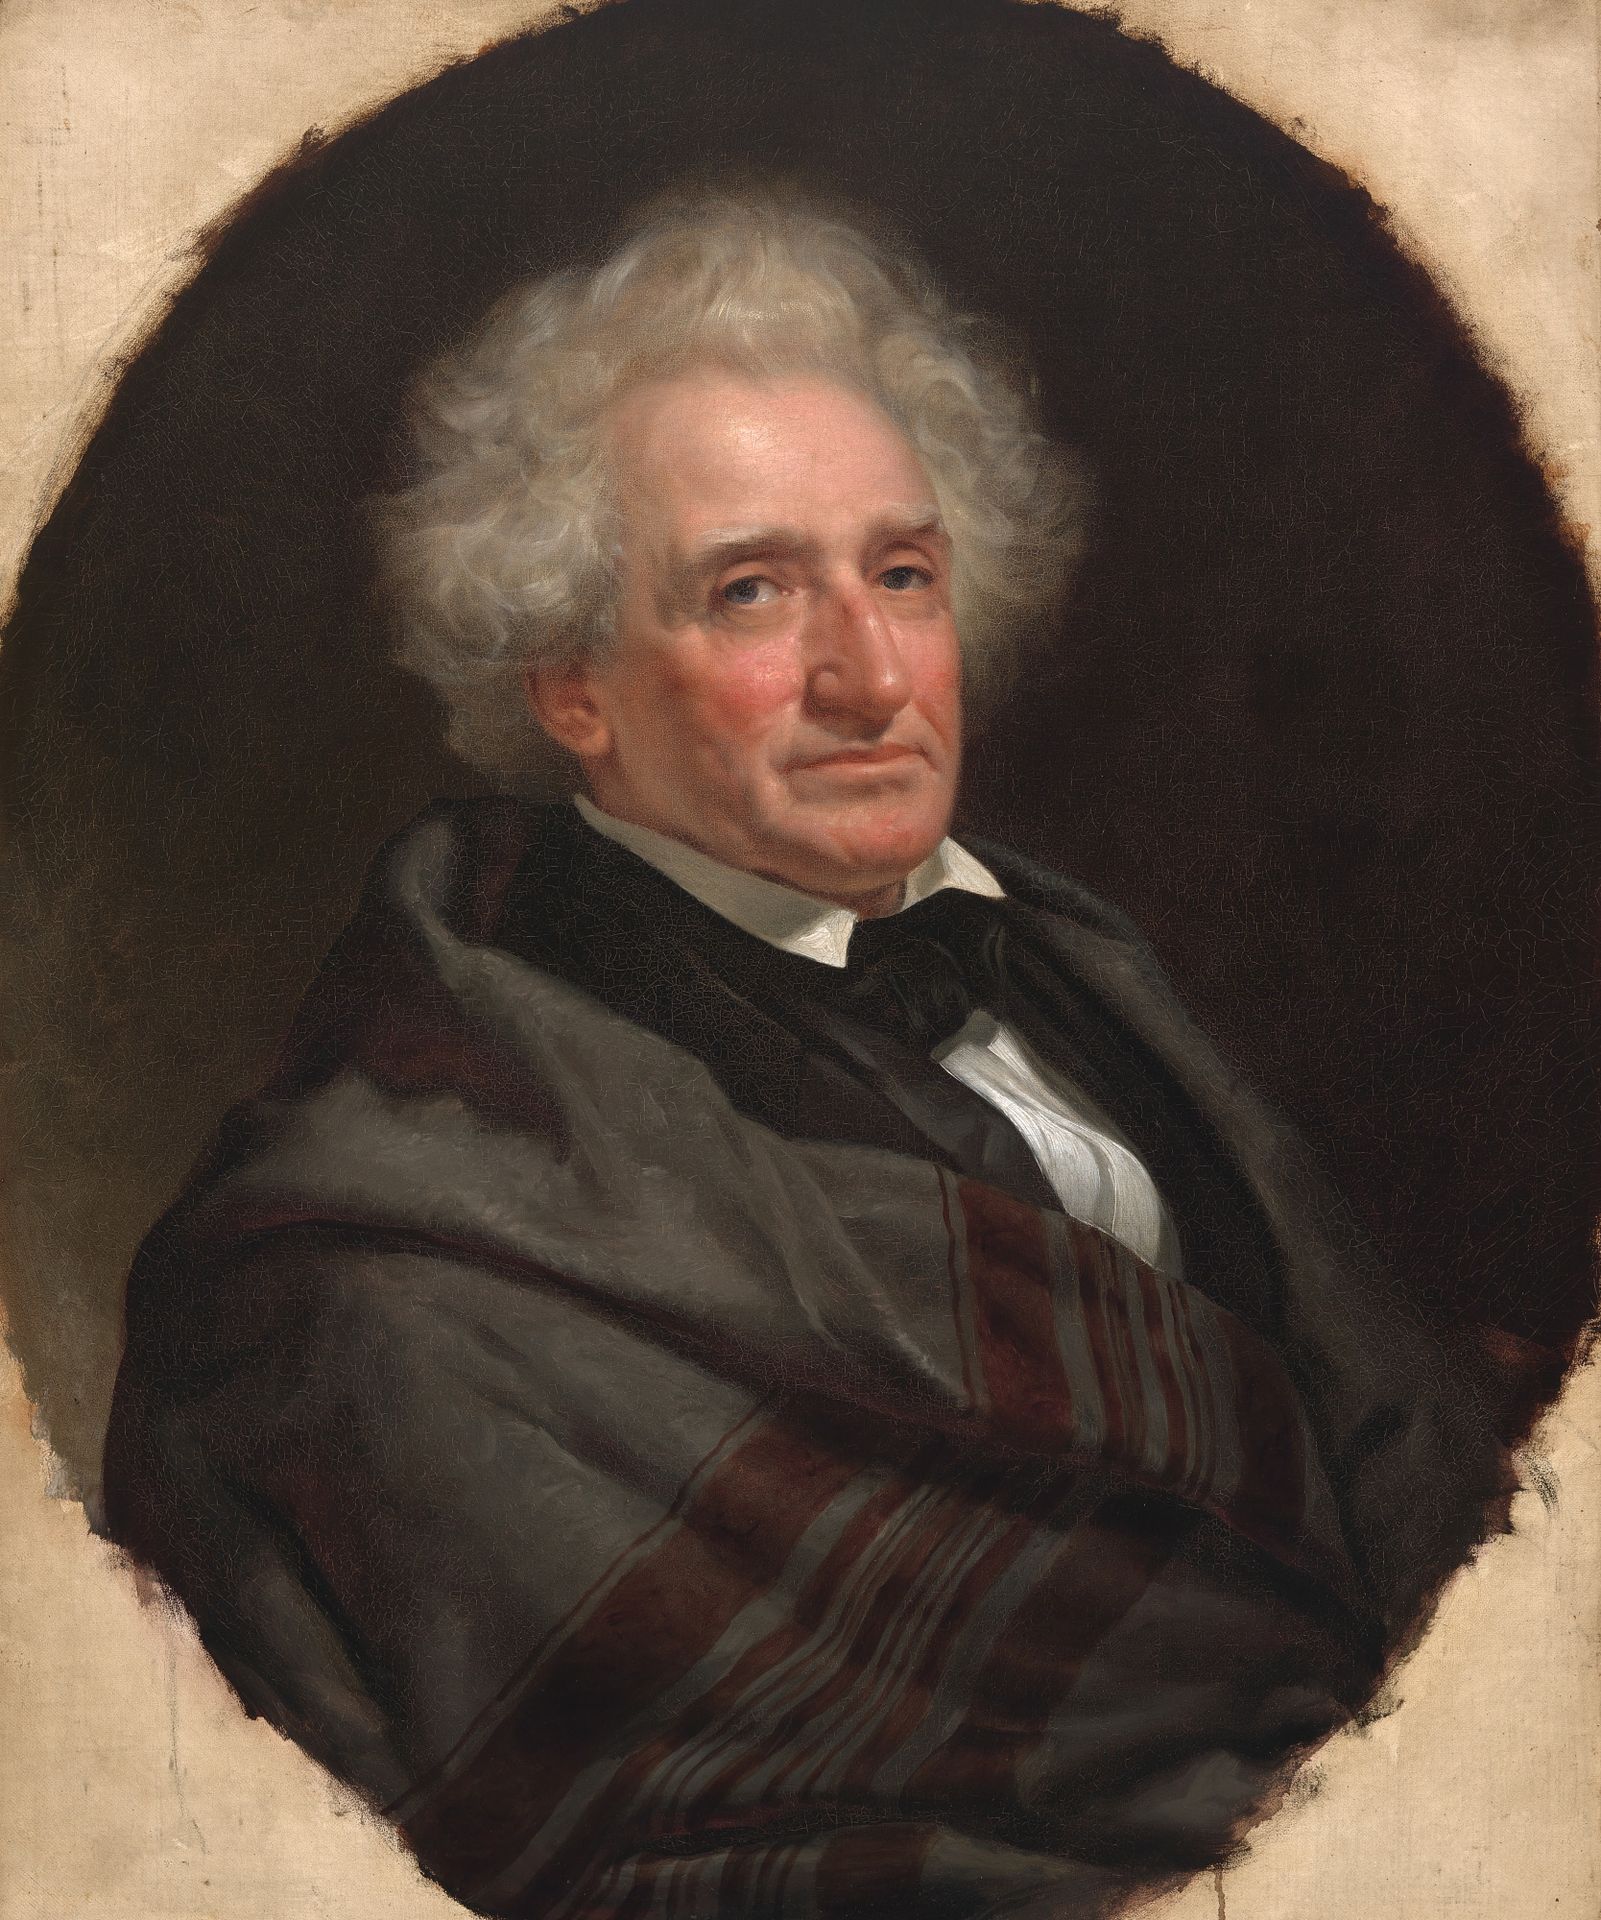 Portrait of Thomas Loraine McKenney by Charles Loring Elliott, oil on canvas, 1856, National Portrait Gallery. A creator of History of the Indian Tribes of North America.